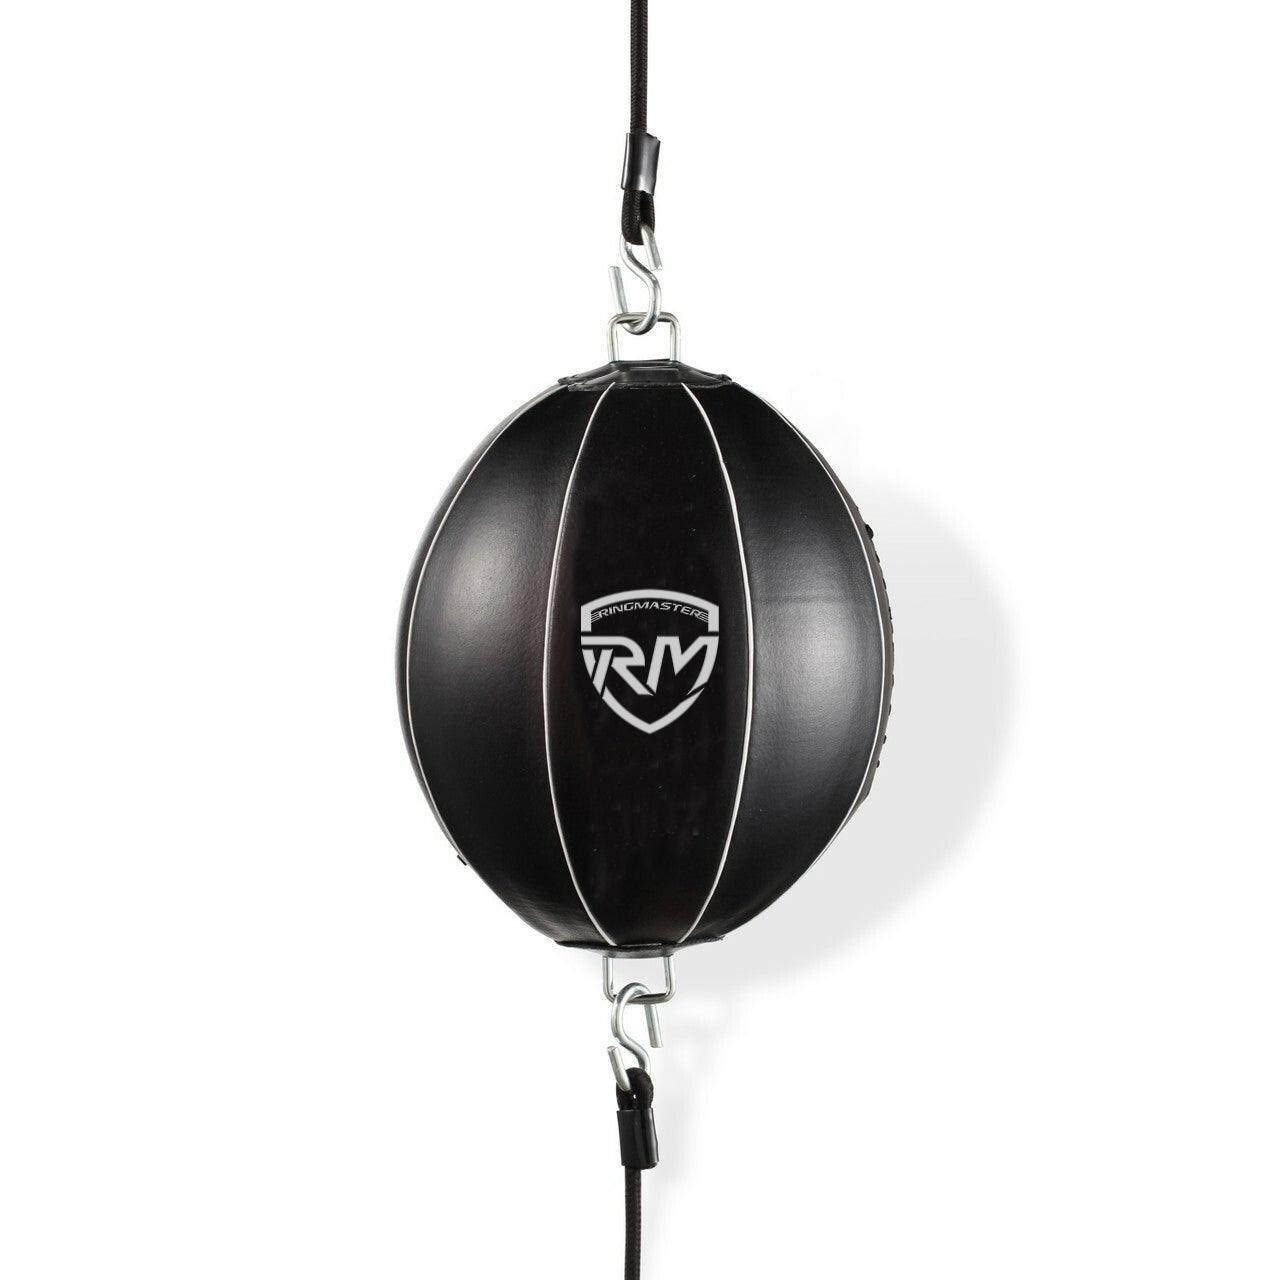 RingMaster Sports Double End Round Speed Ball BoxR Series Genuine Leather White/Black - RINGMASTER SPORTS - Made For Champions